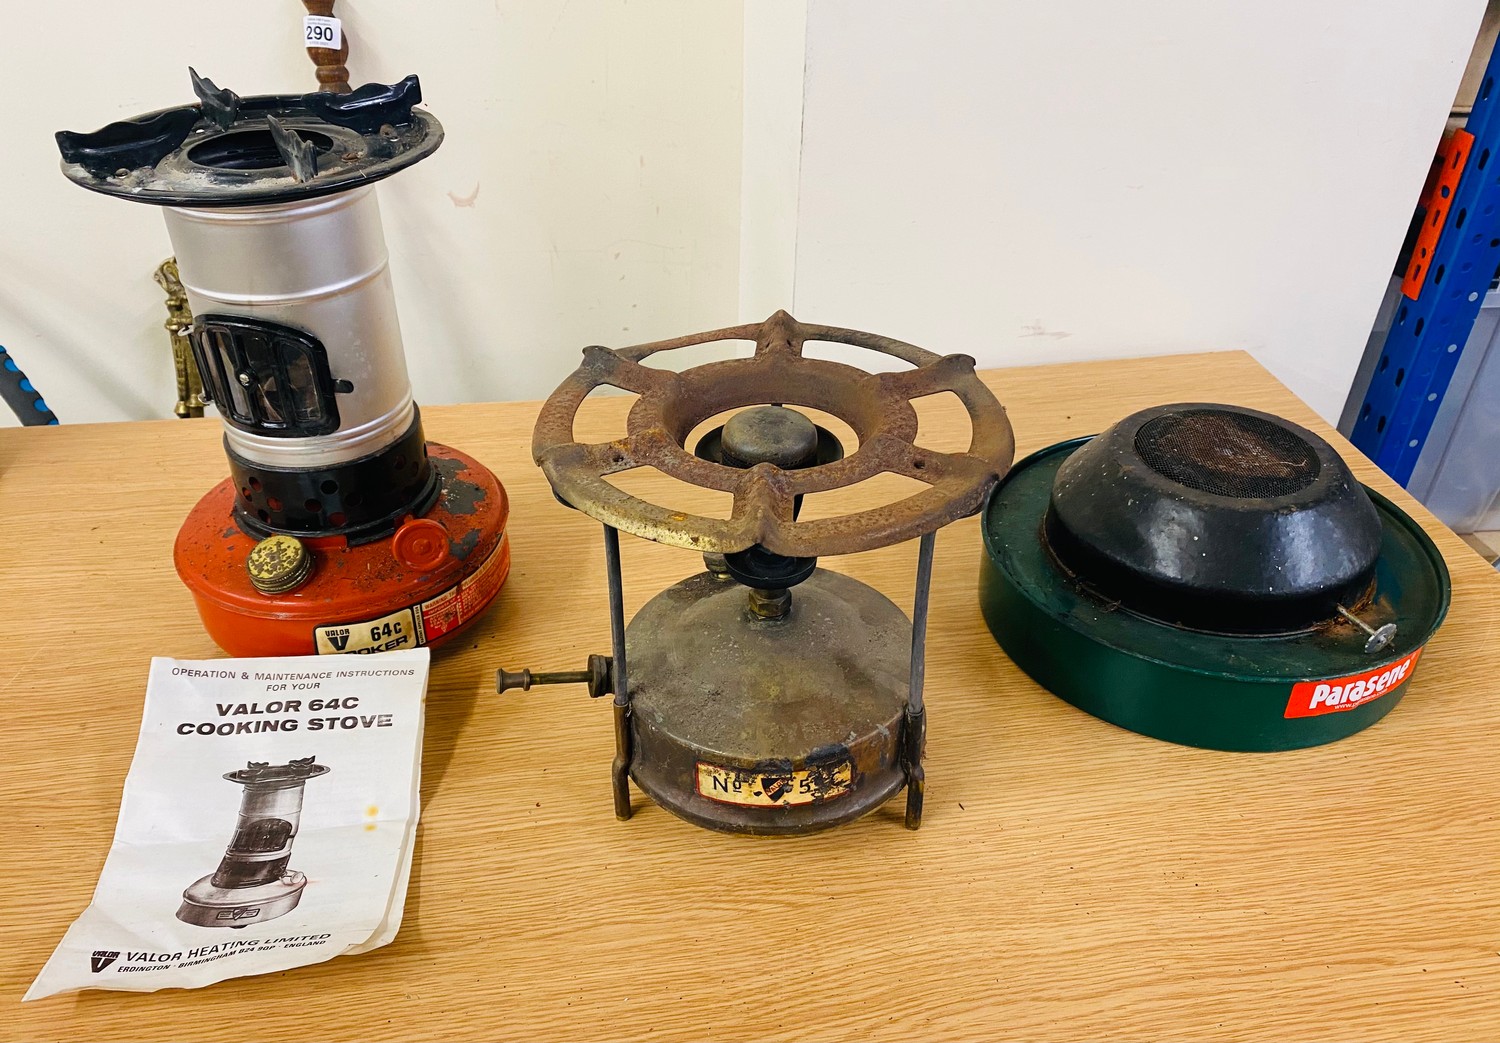 Valor 64c cooking stove, valor 55c camping stove and a vintage